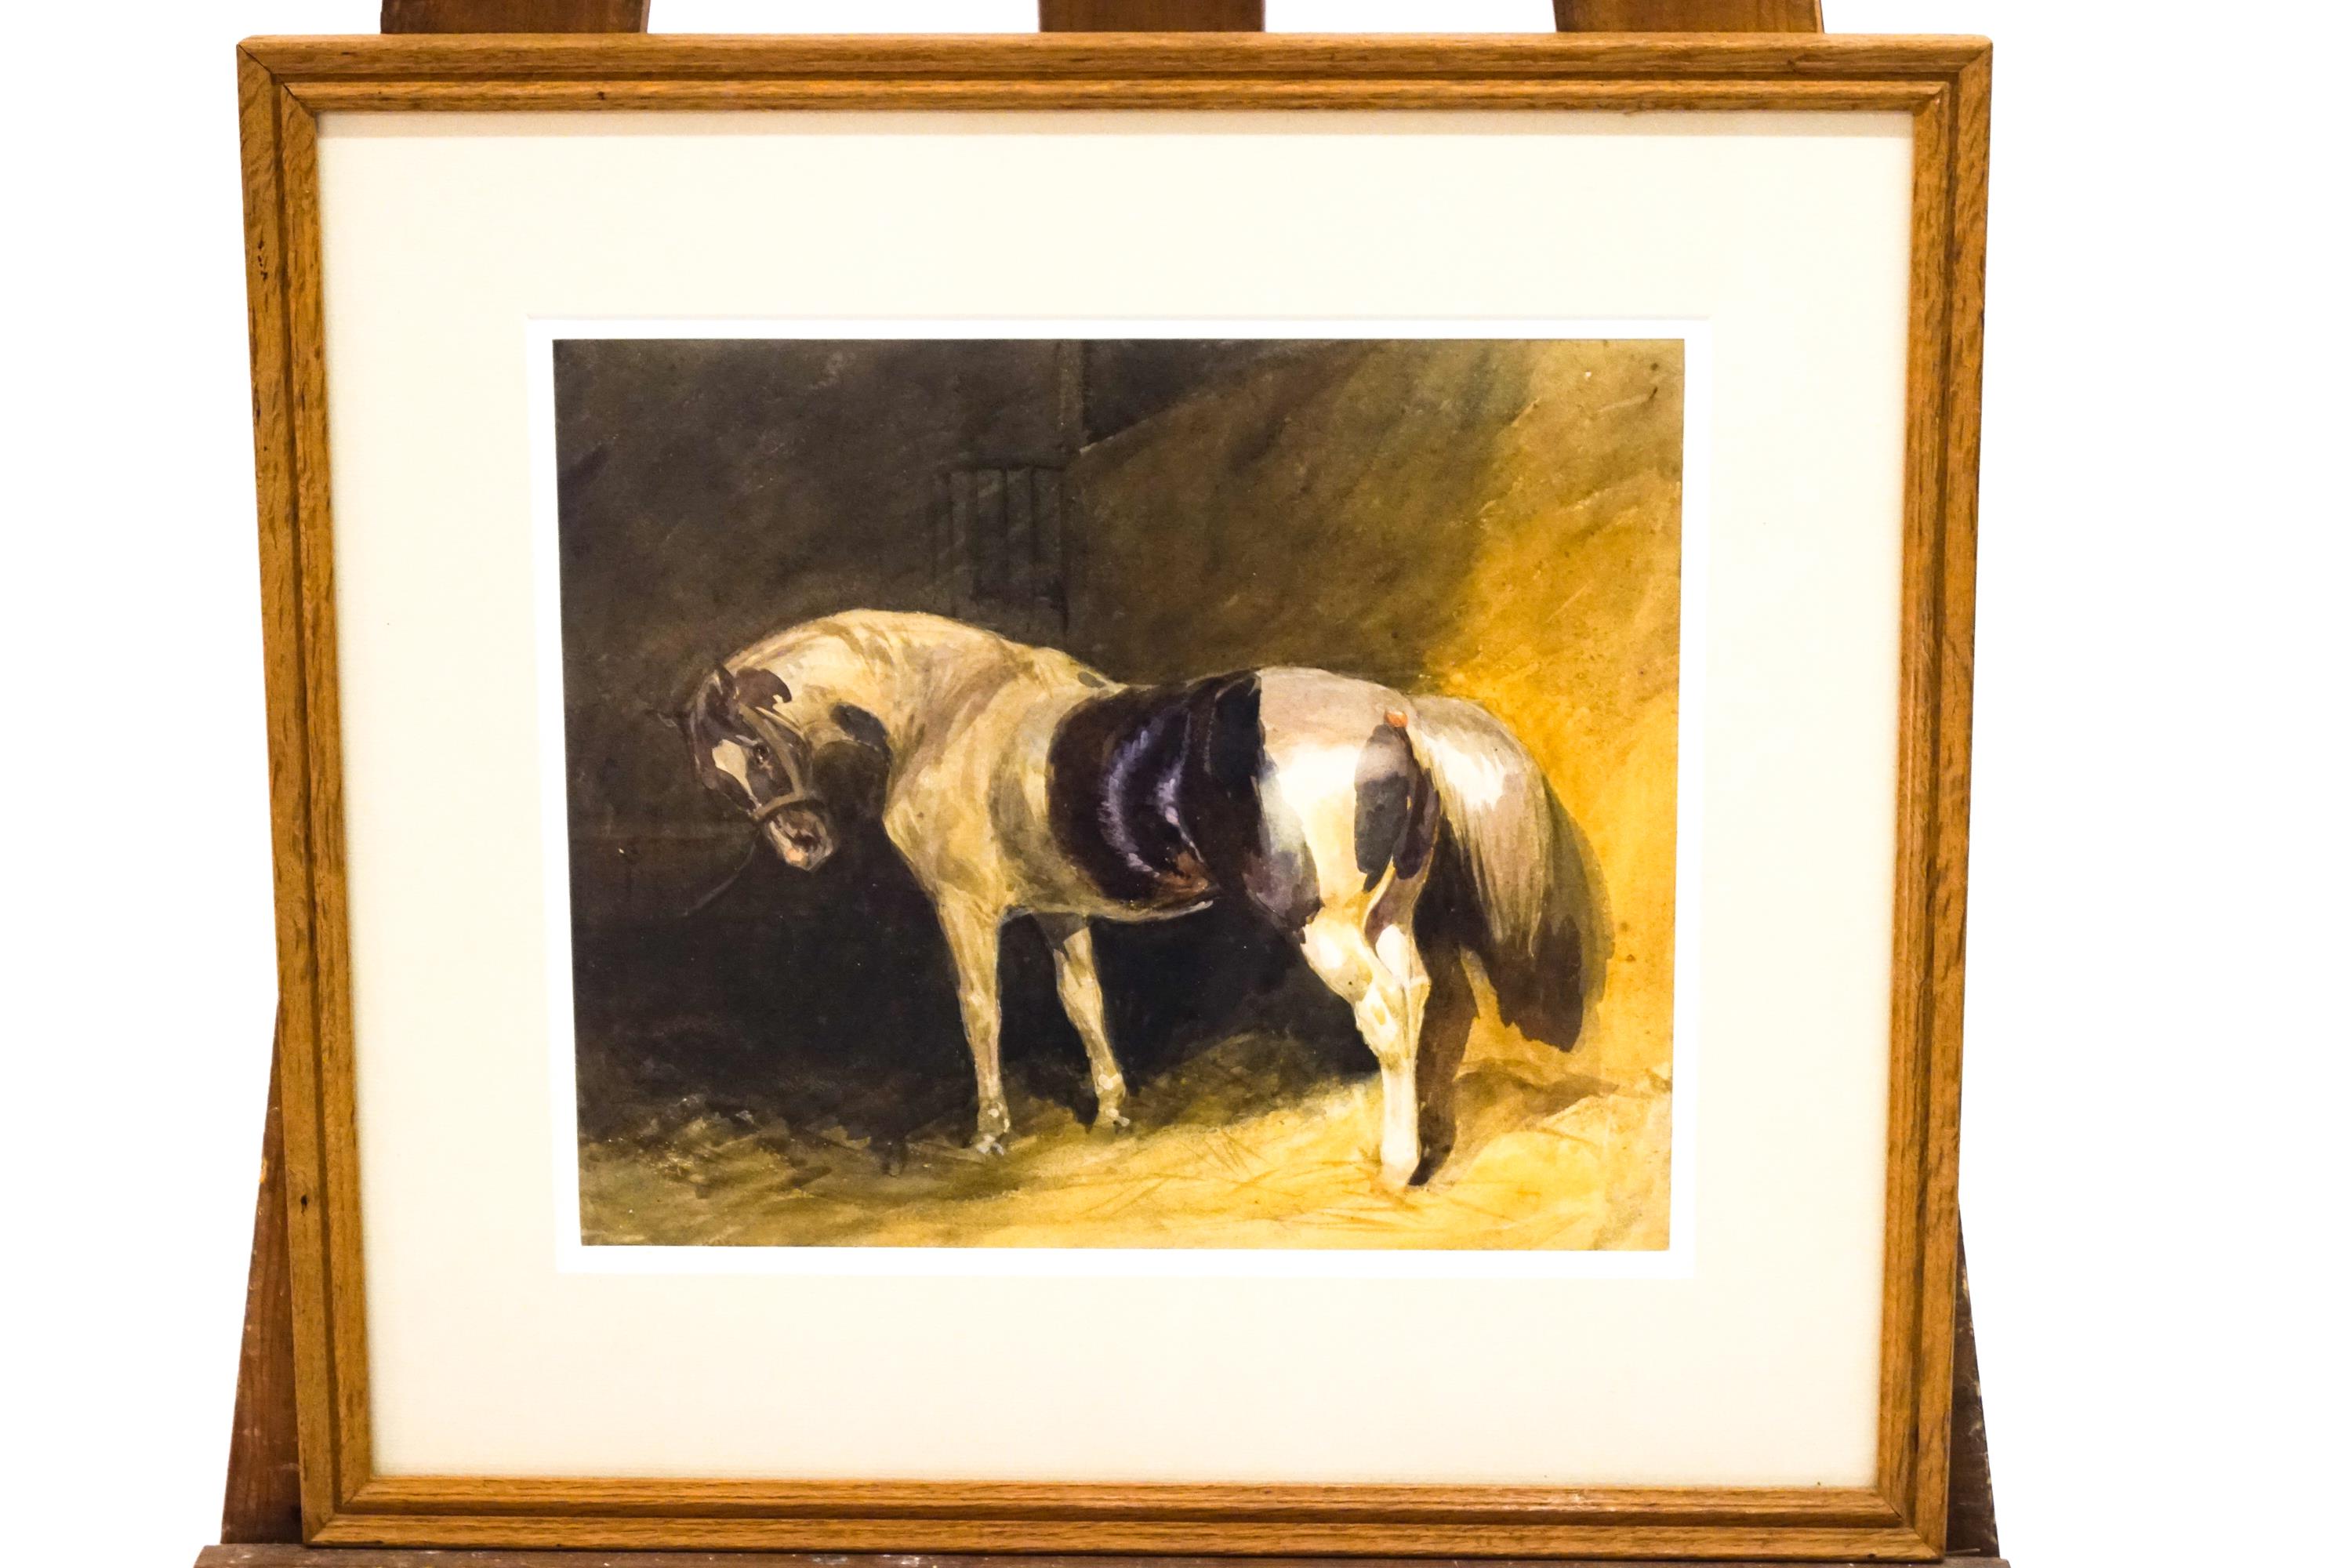 Attributed to Frederick Taylor, A piebald pony in a stable, watercolour.